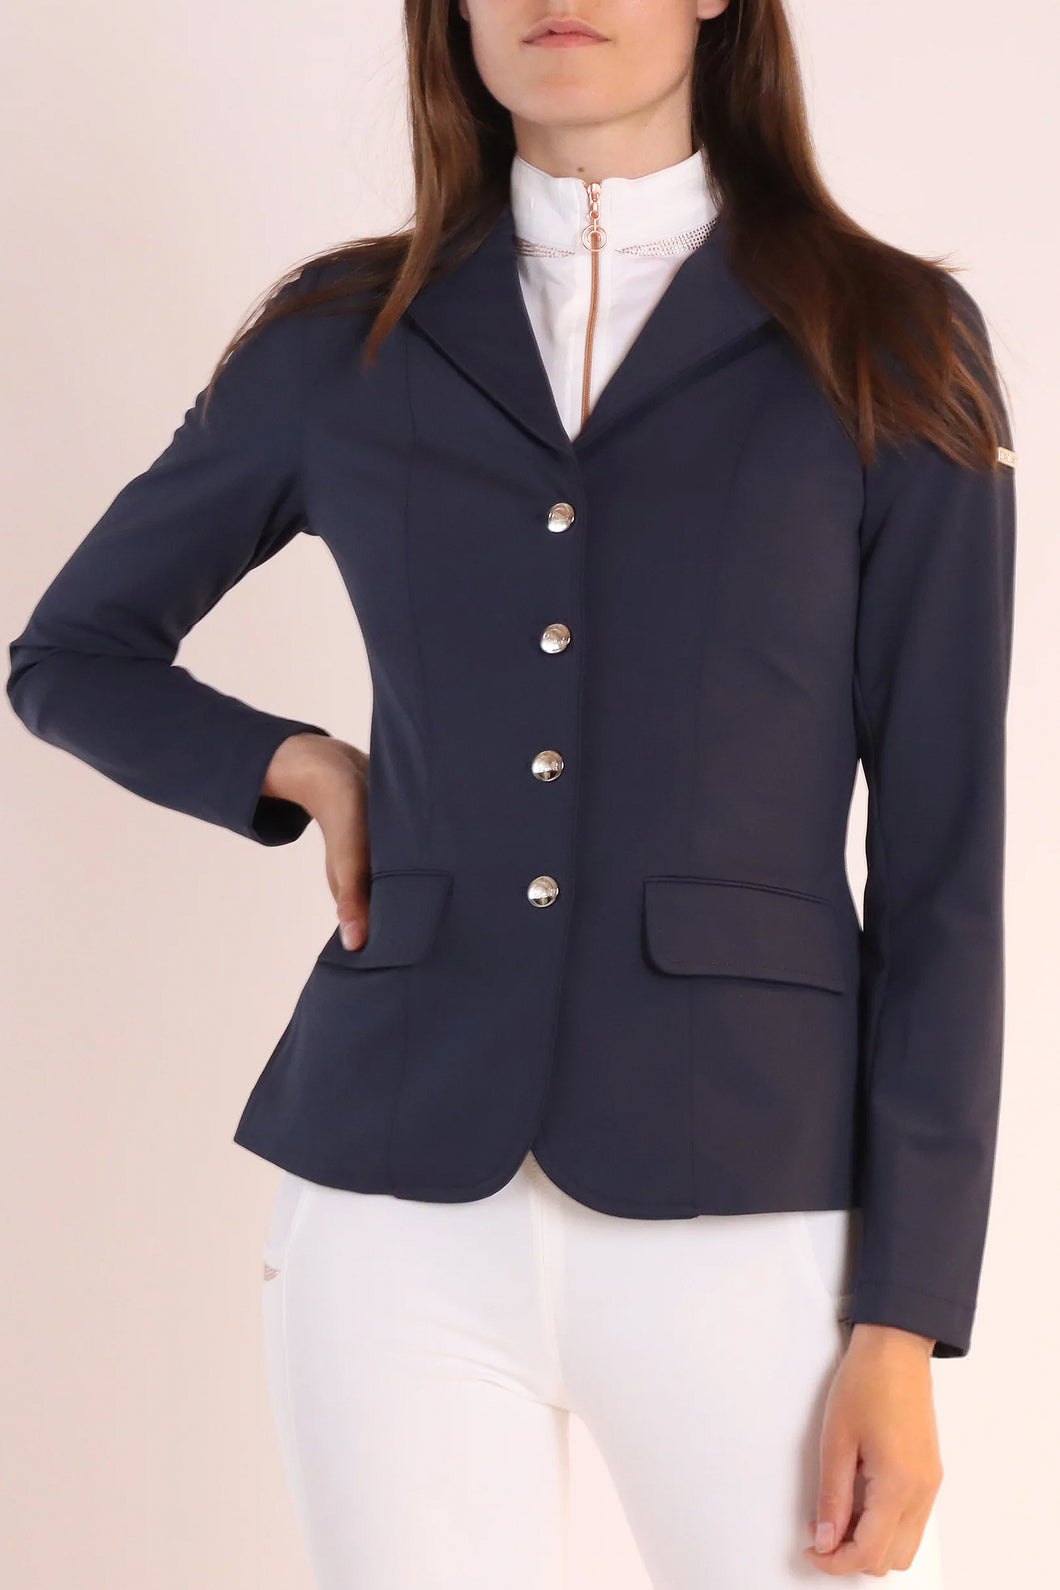 Kathy Zipped Classic Competition Jacket - Navy